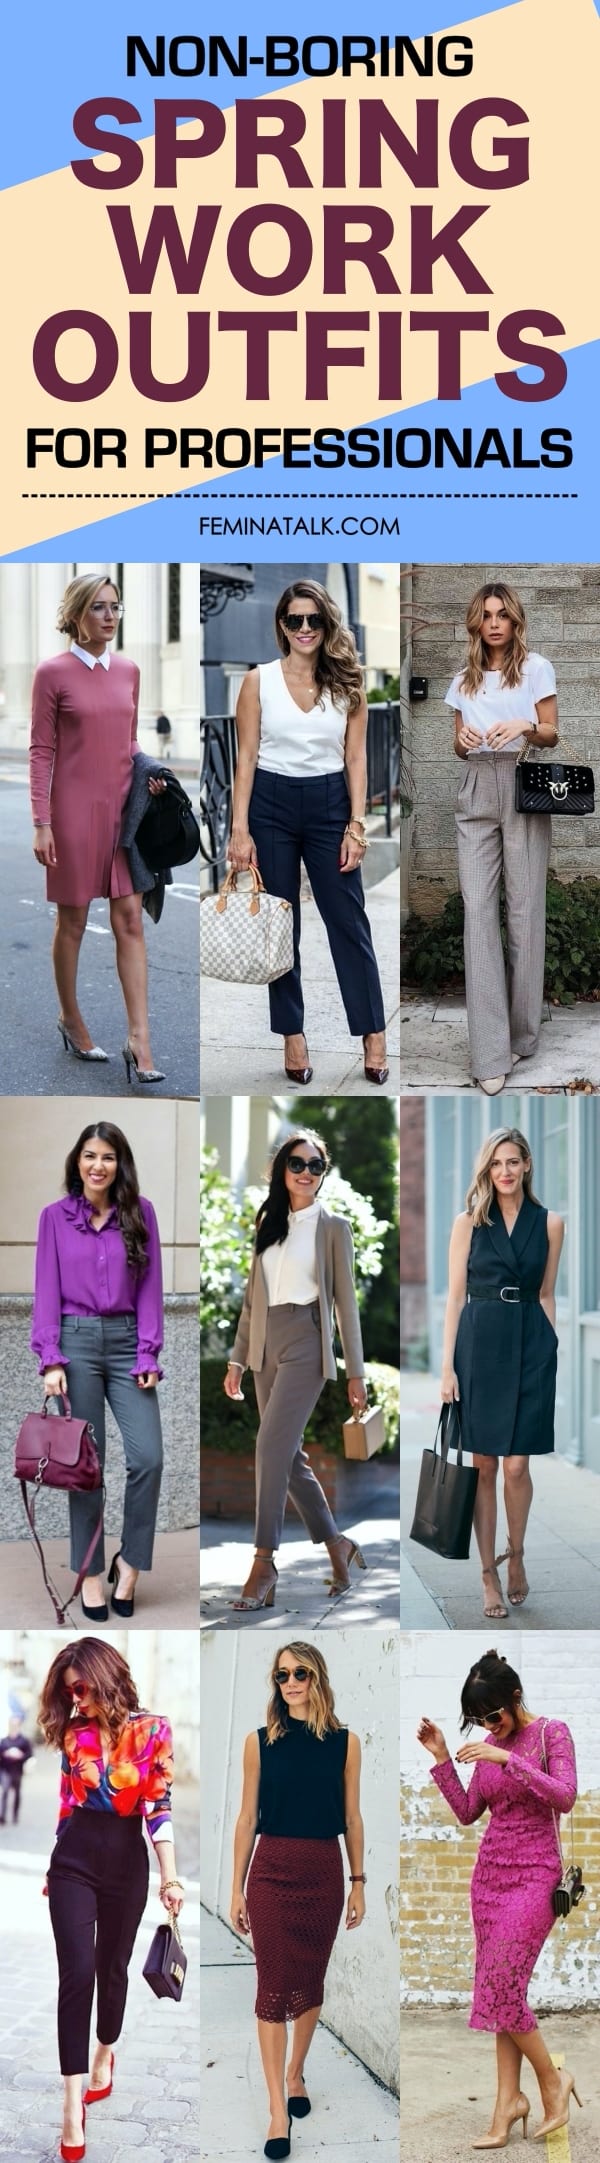 37 Non-Boring Spring Work Outfits for Professionals – FeminaTalk